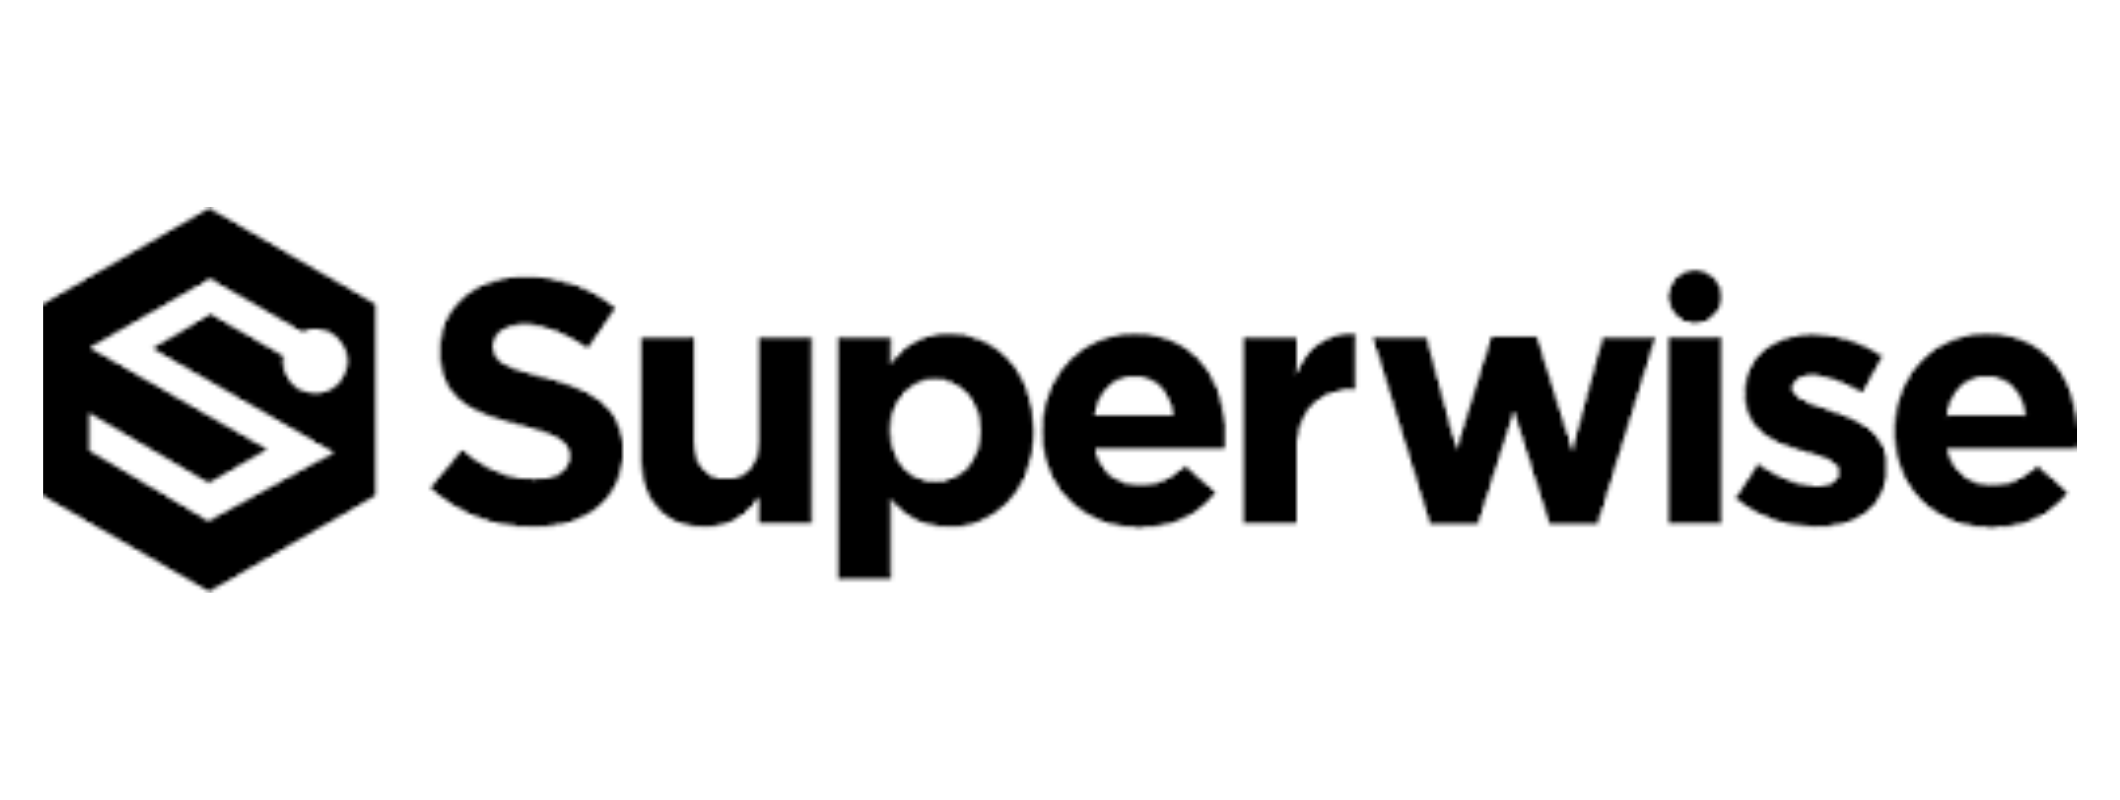 Superwise-1